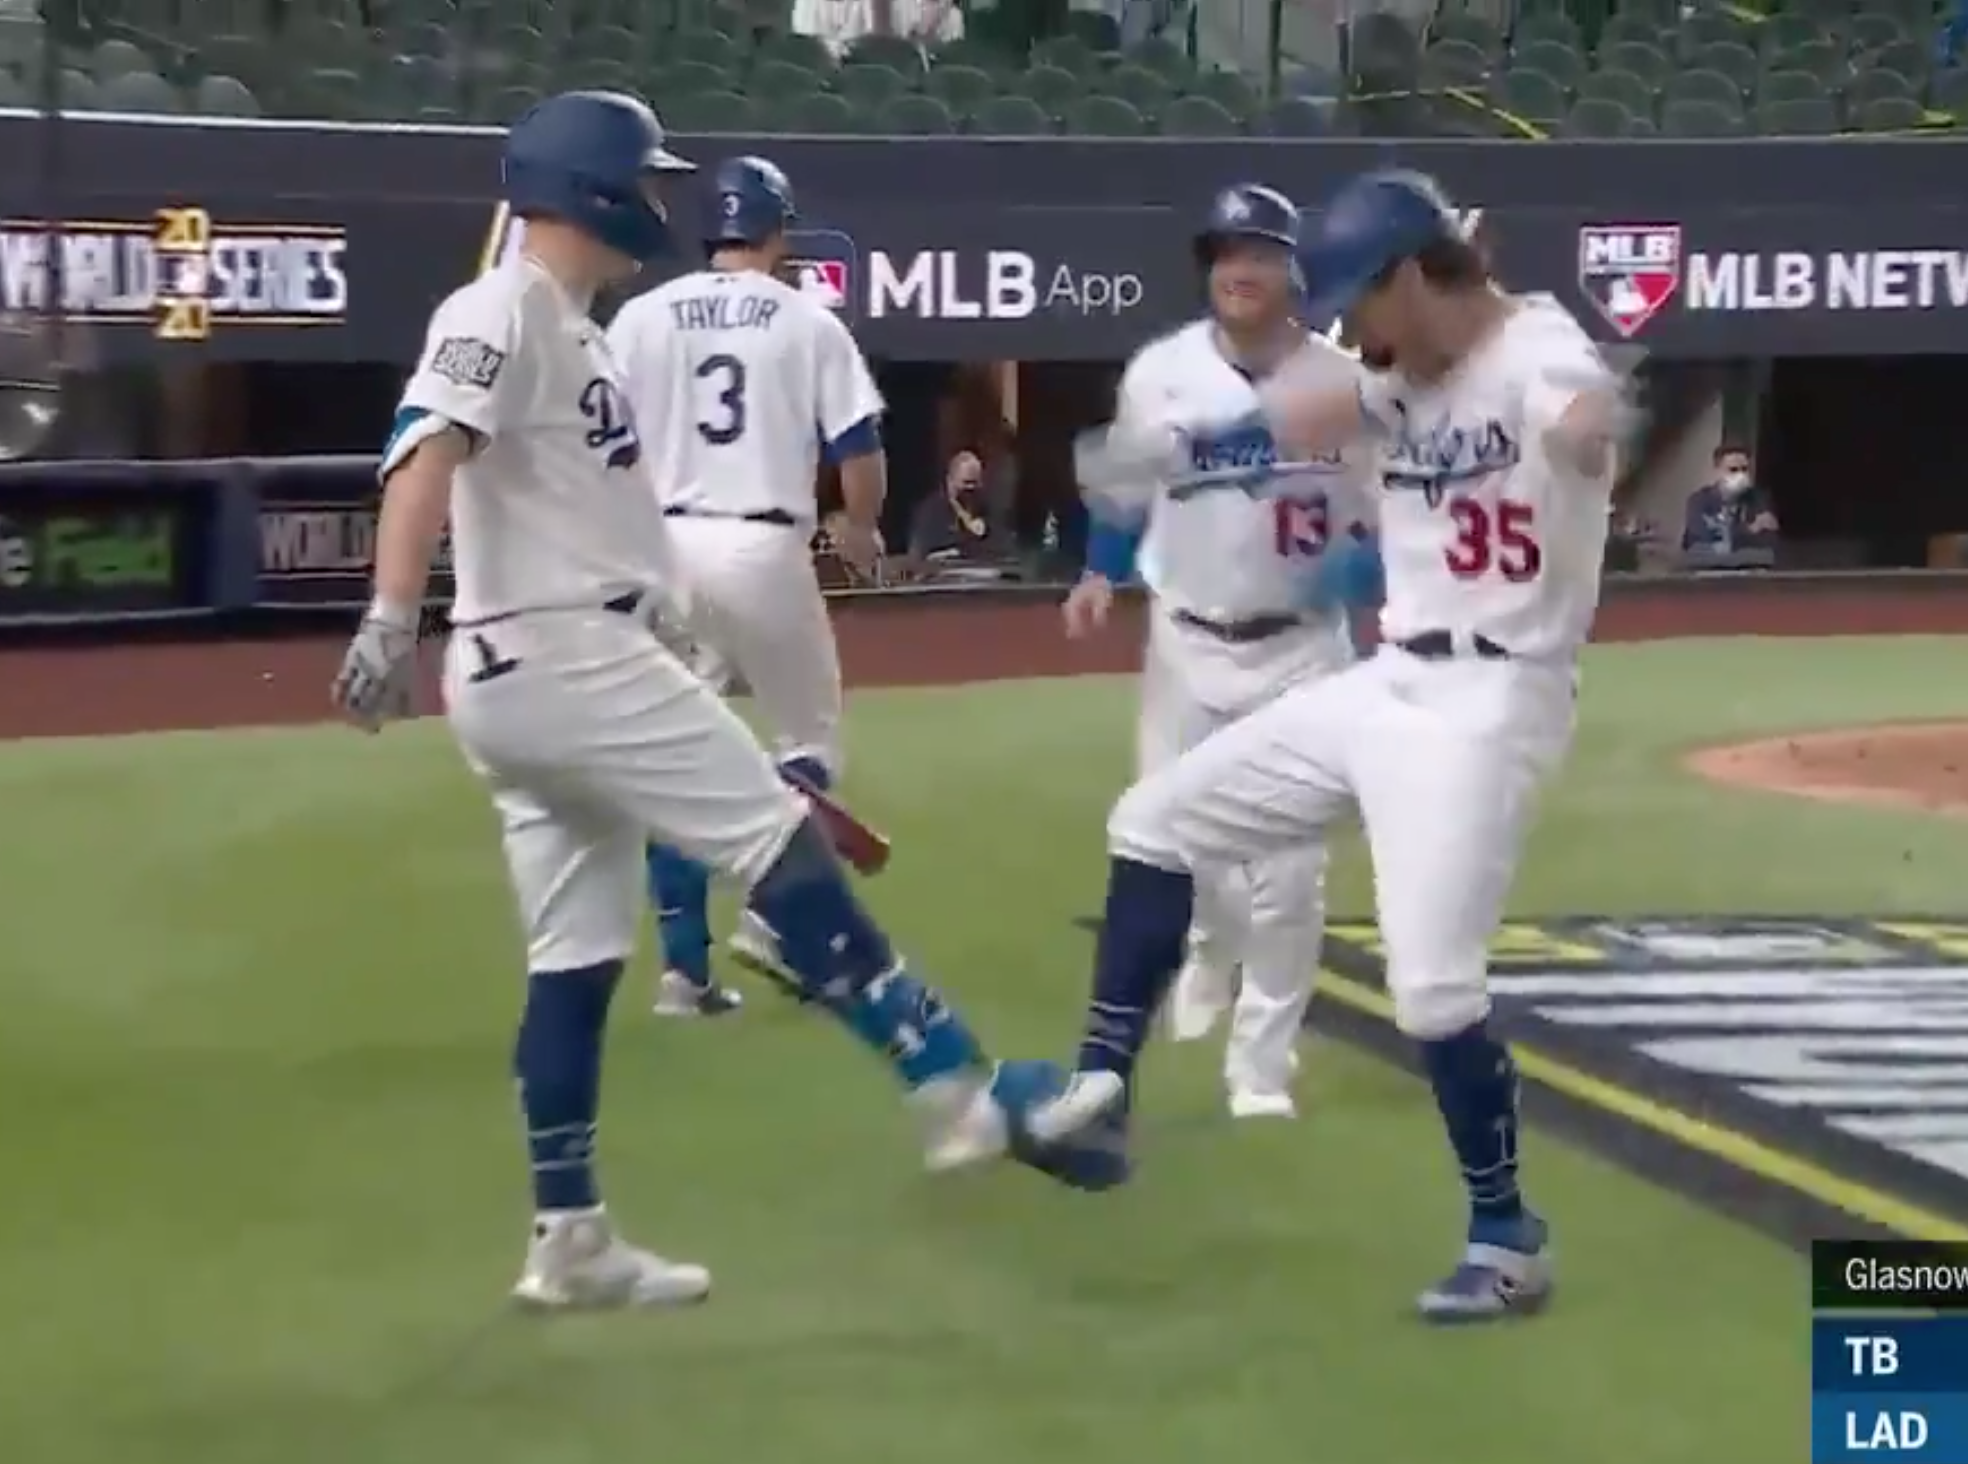 Dodgers – Rays: Cody Bellinger found safe way to celebrate home runs